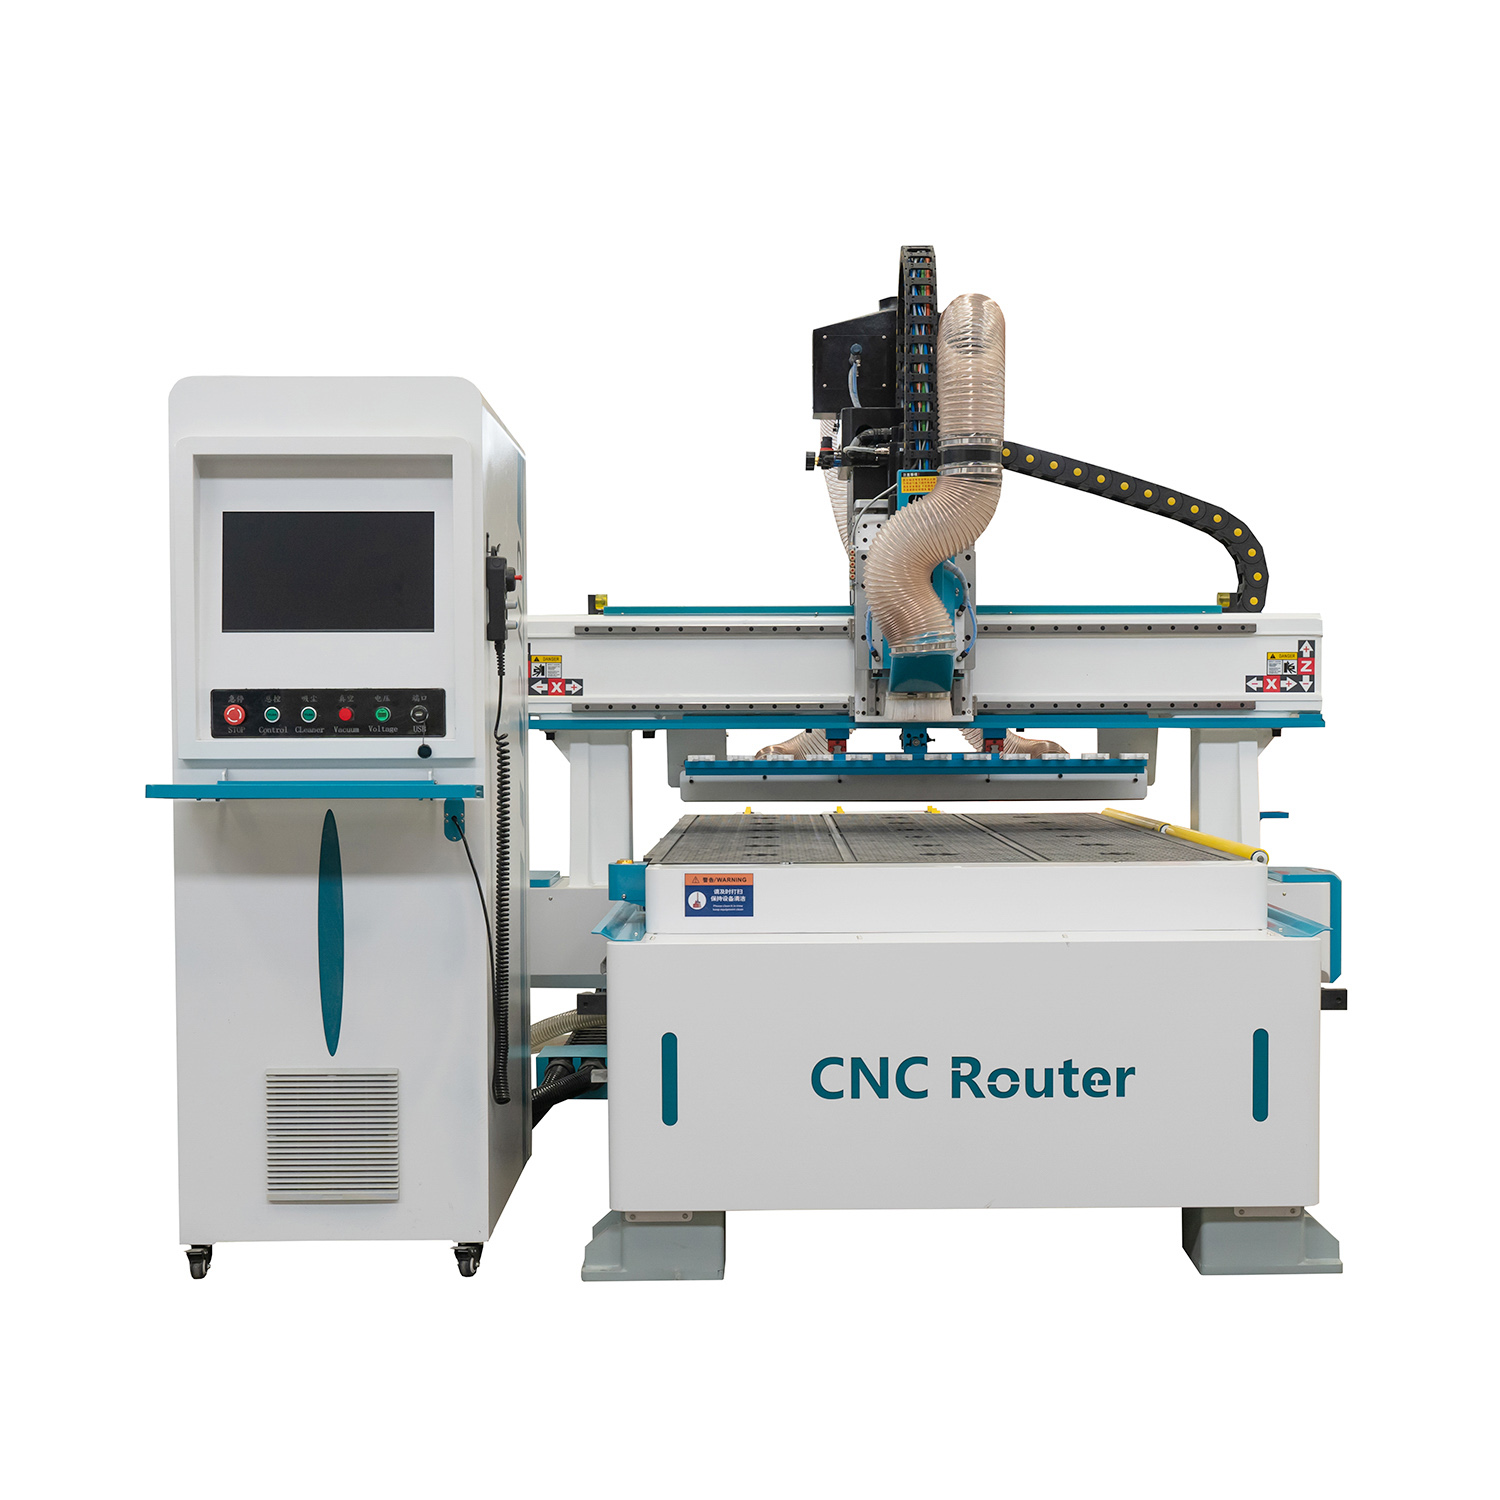 OEM/ODM Manufacturer Cnc Router Plastic Cutting - 4*8 Feet Wood CNC Router with Linear Type Automatic Tool Change – Apex